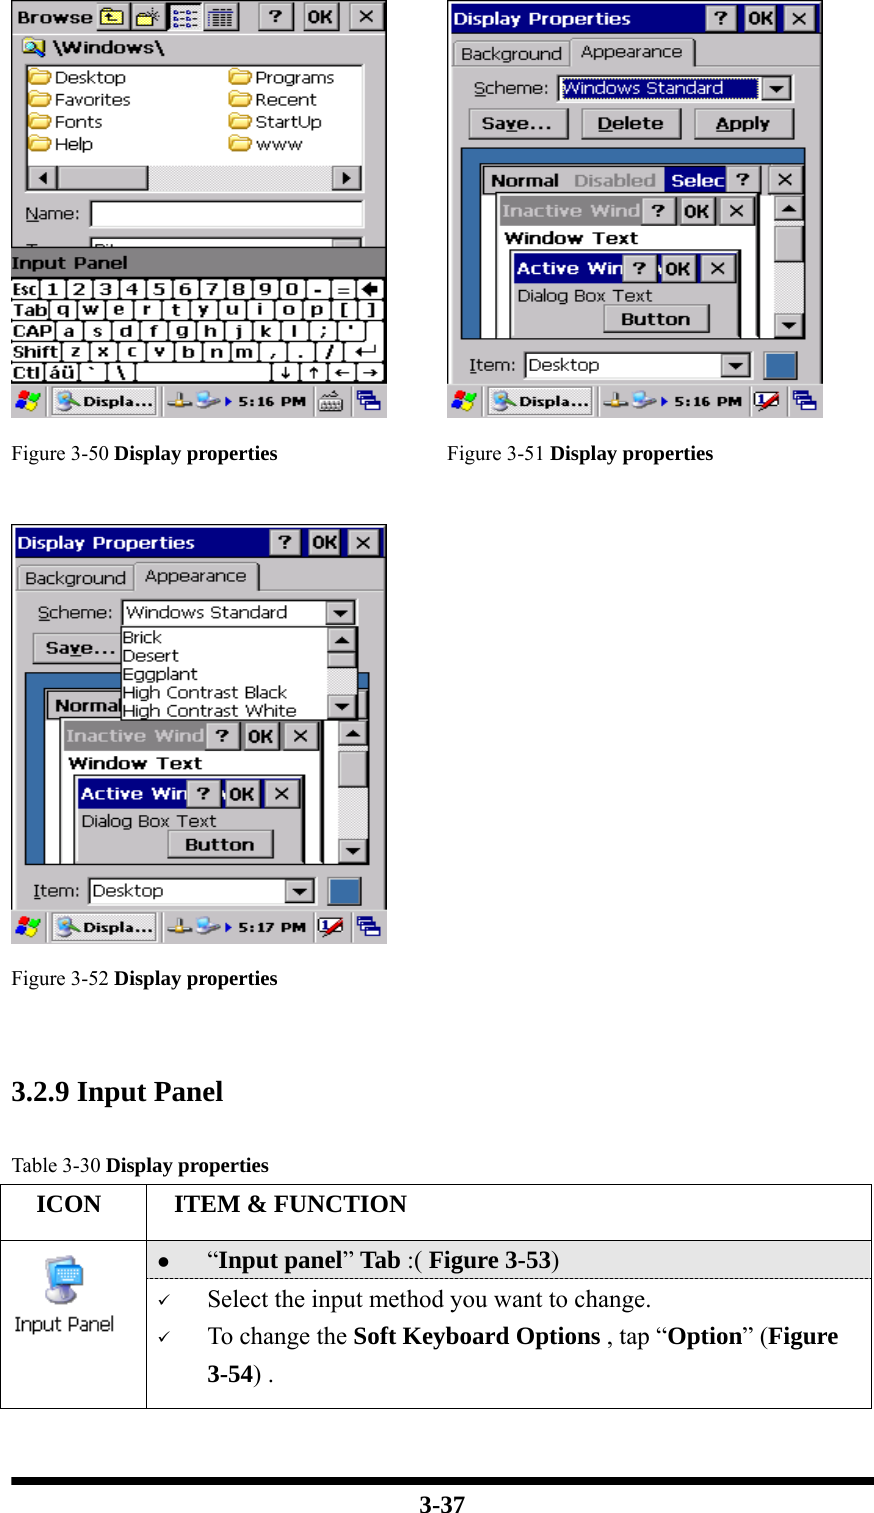  3-37    Figure 3-50 Display properties Figure 3-51 Display properties     Figure 3-52 Display properties    3.2.9 Input Panel  Table 3-30 Display properties   ICON   ITEM &amp; FUNCTION z “Input panel” Tab :( Figure 3-53)    9 Select the input method you want to change. 9 To change the Soft Keyboard Options , tap “Option” (Figure 3-54) . 